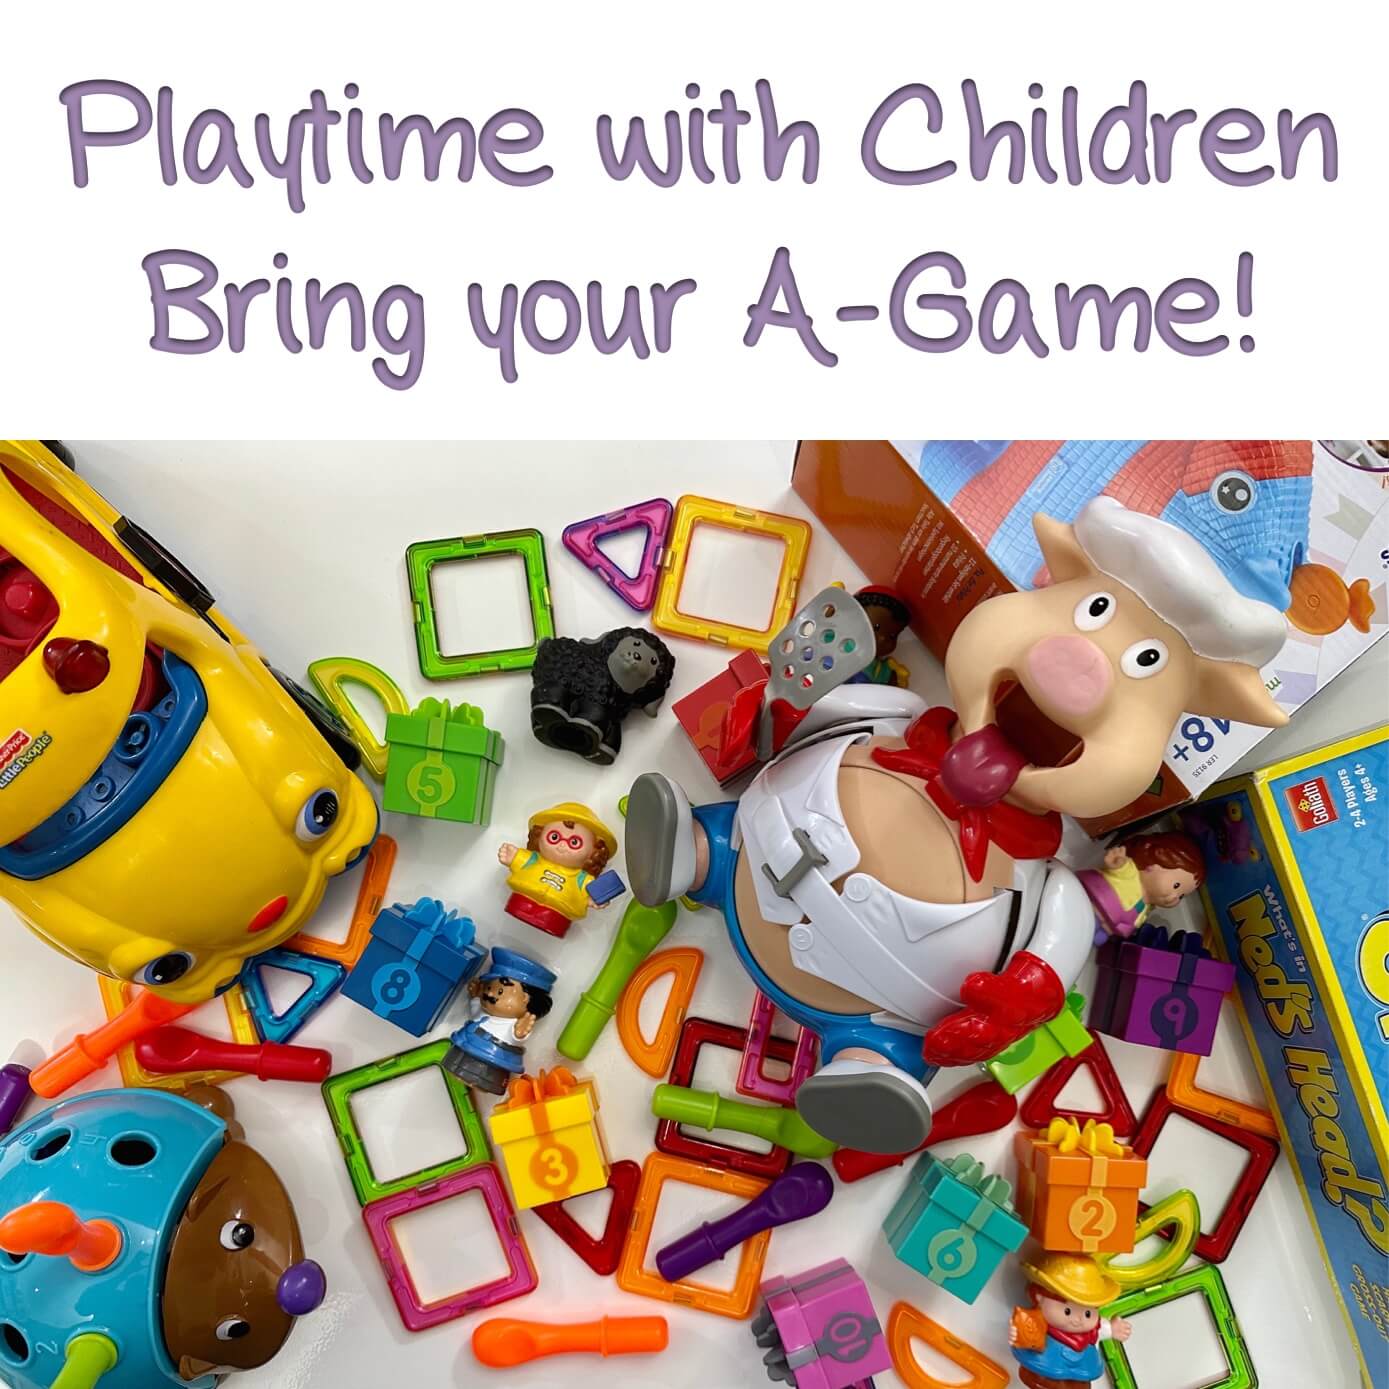 Playtime with Children: Bring your A-Game!